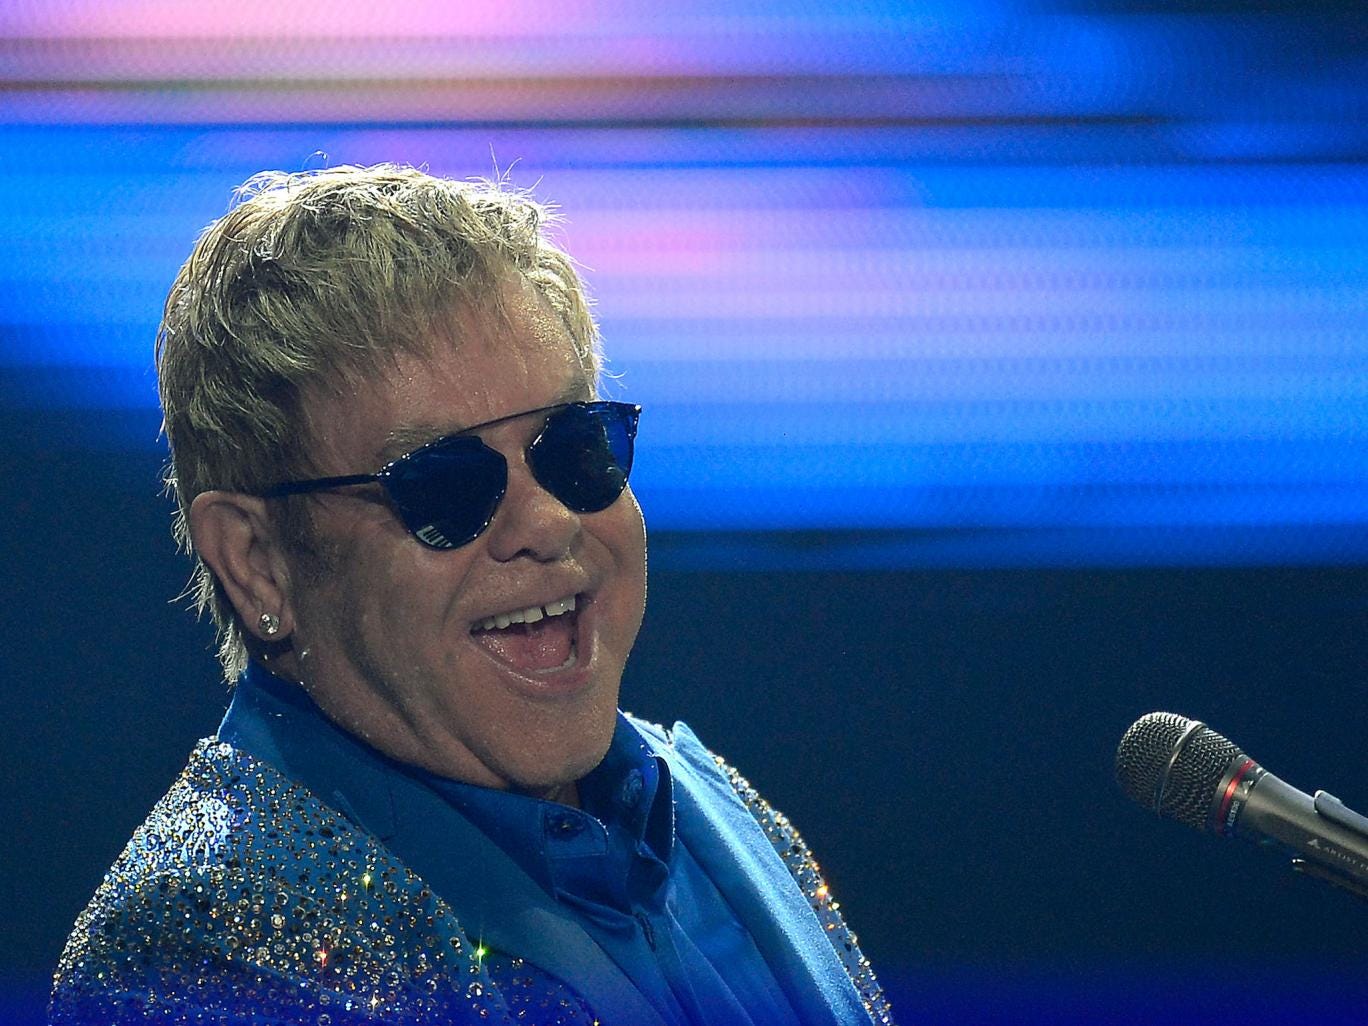 Sir Elton John may have  received a phone call from the real Vladimir Puti